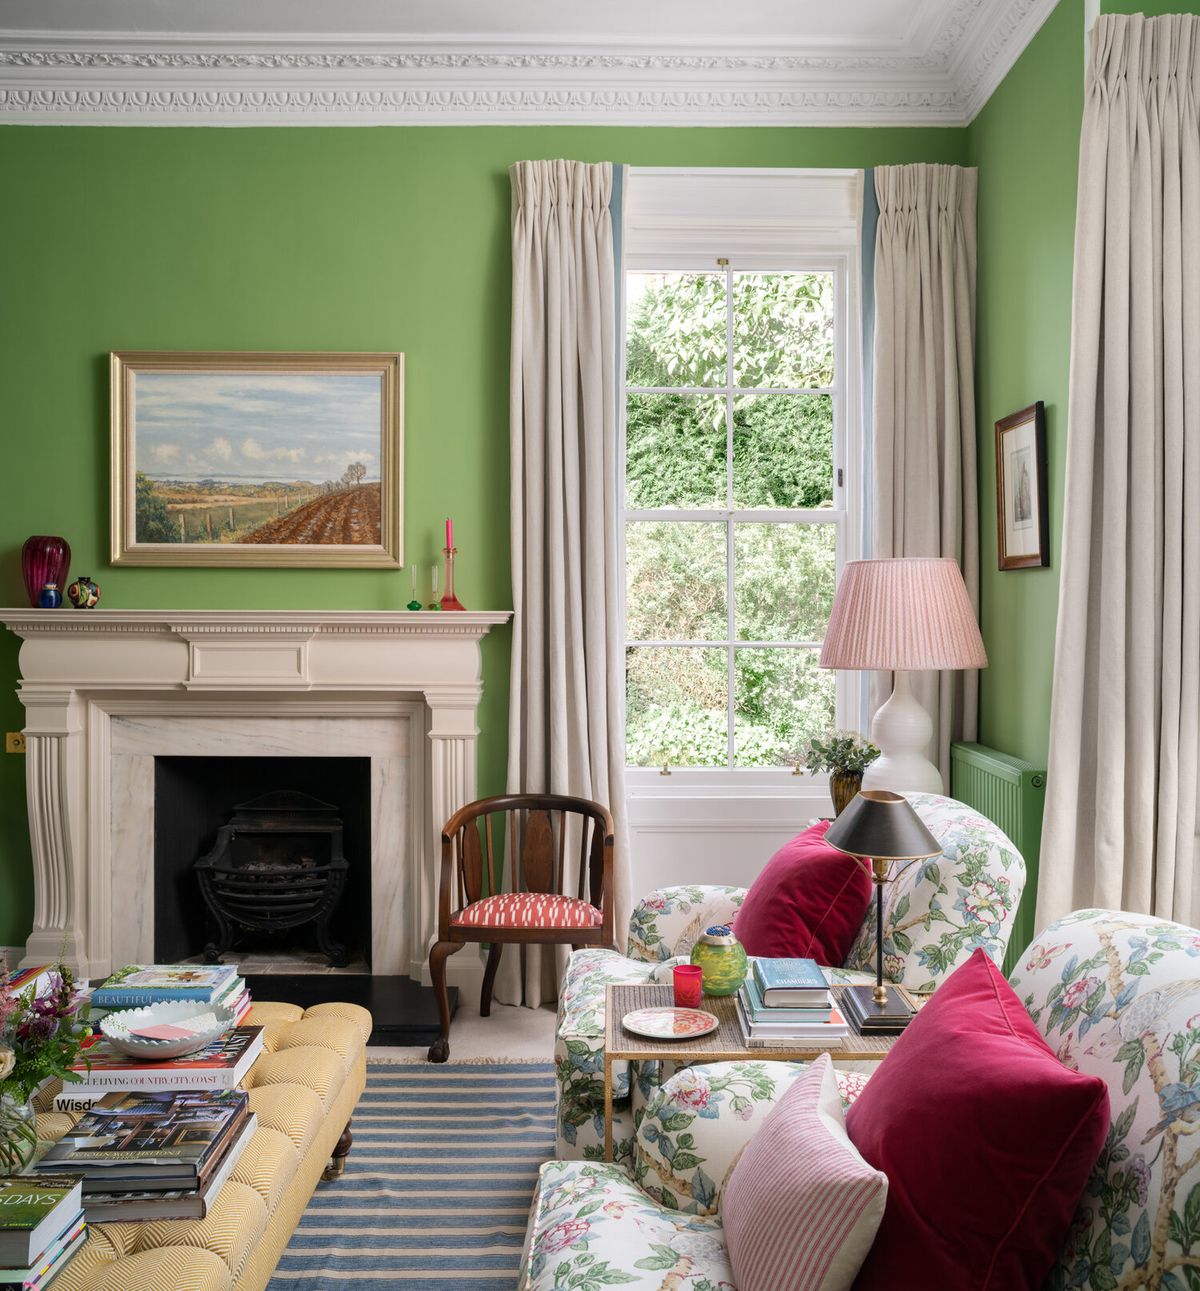 Bright Colors in an English Country Decor Living Room via jessicabuckley